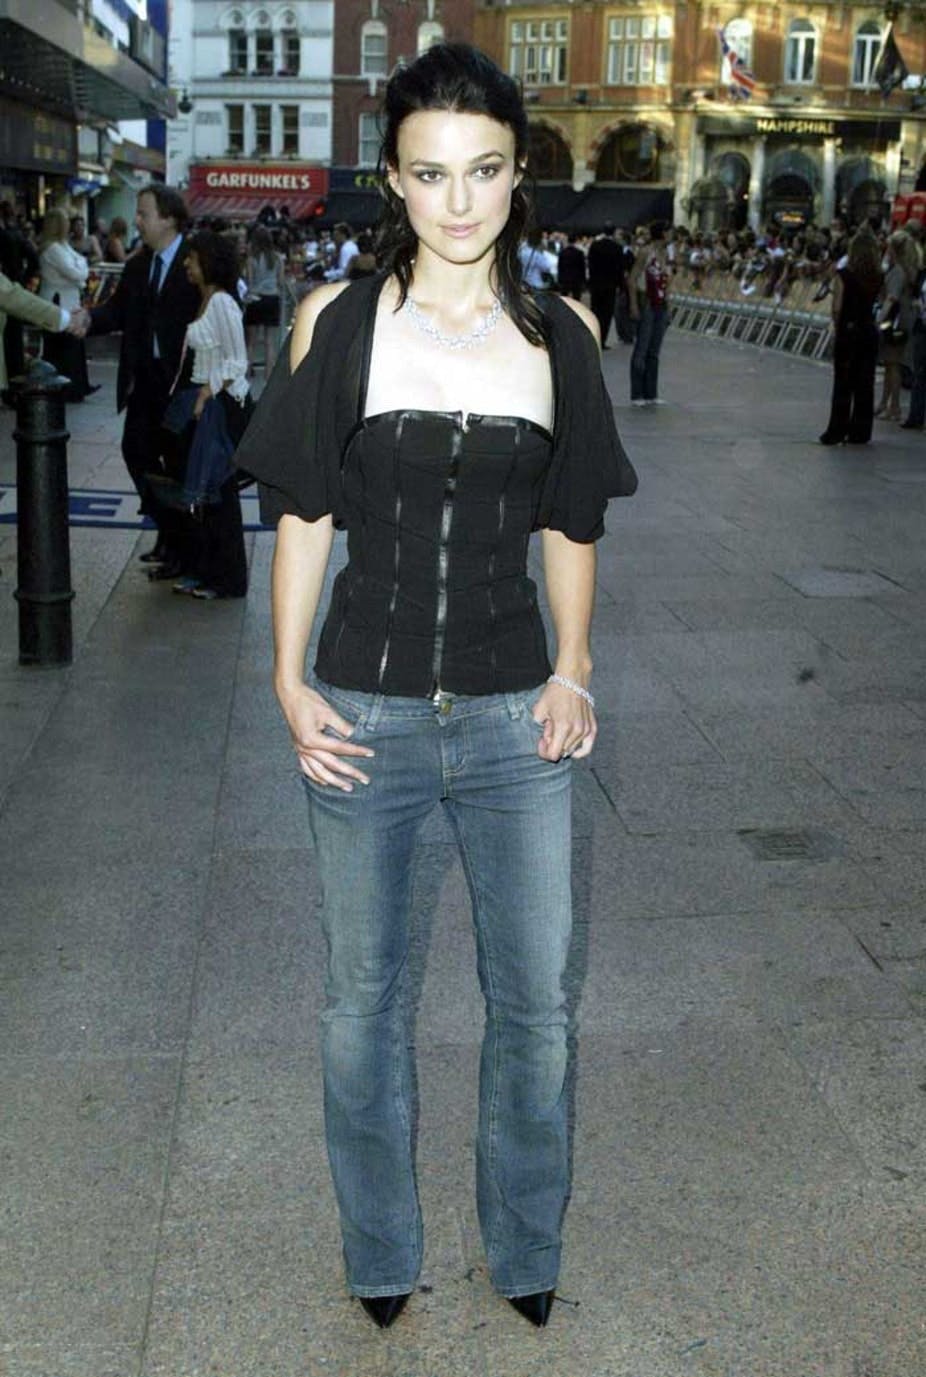 Keira Knightley premiere på Pirates of the caribbean i 2003